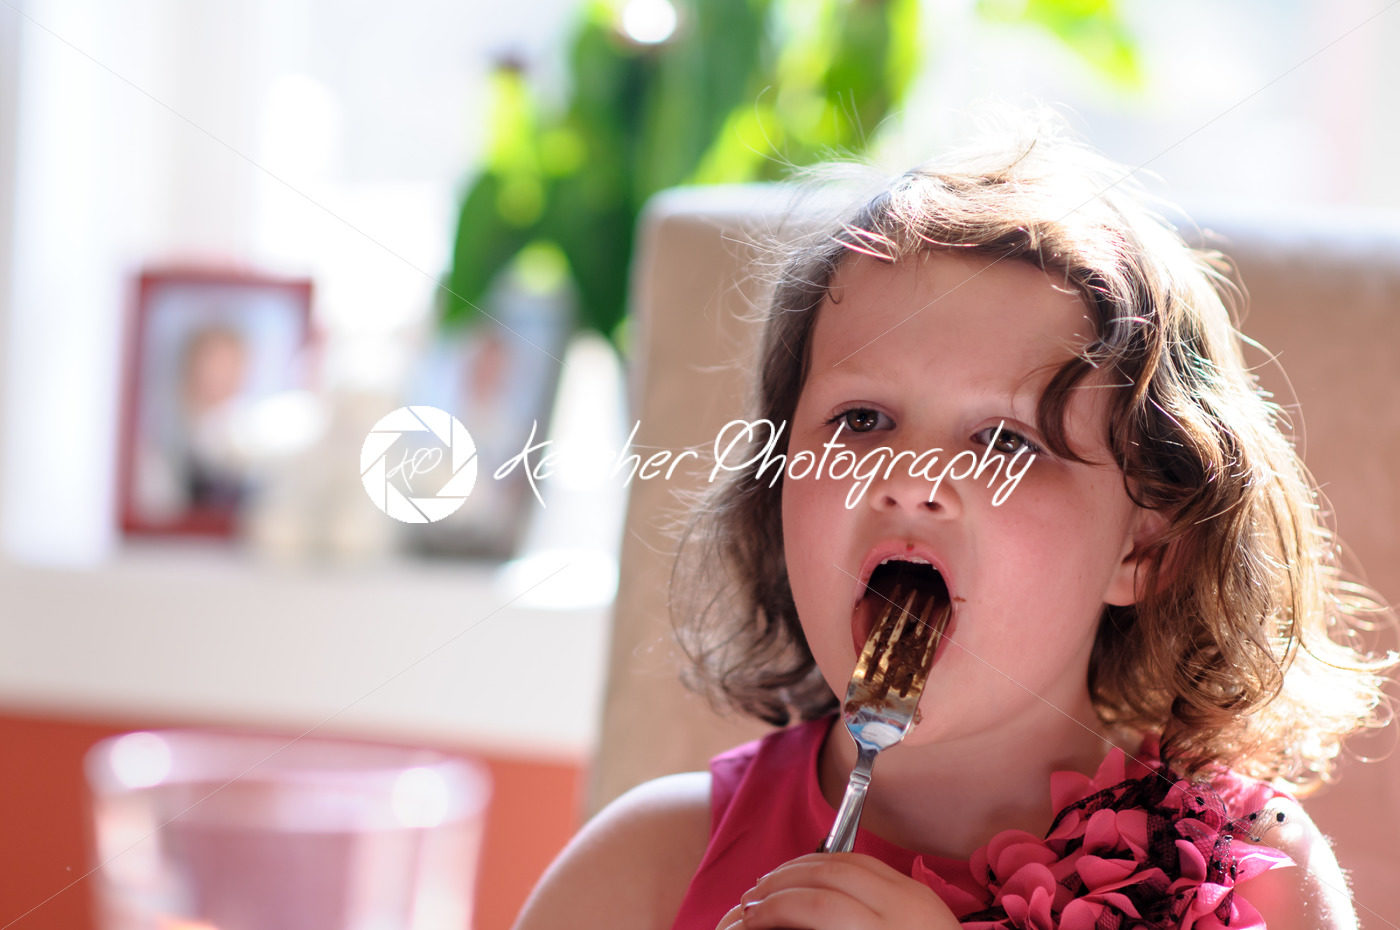 Young girl indoors eating birthday cake licking fork - Kelleher Photography Store